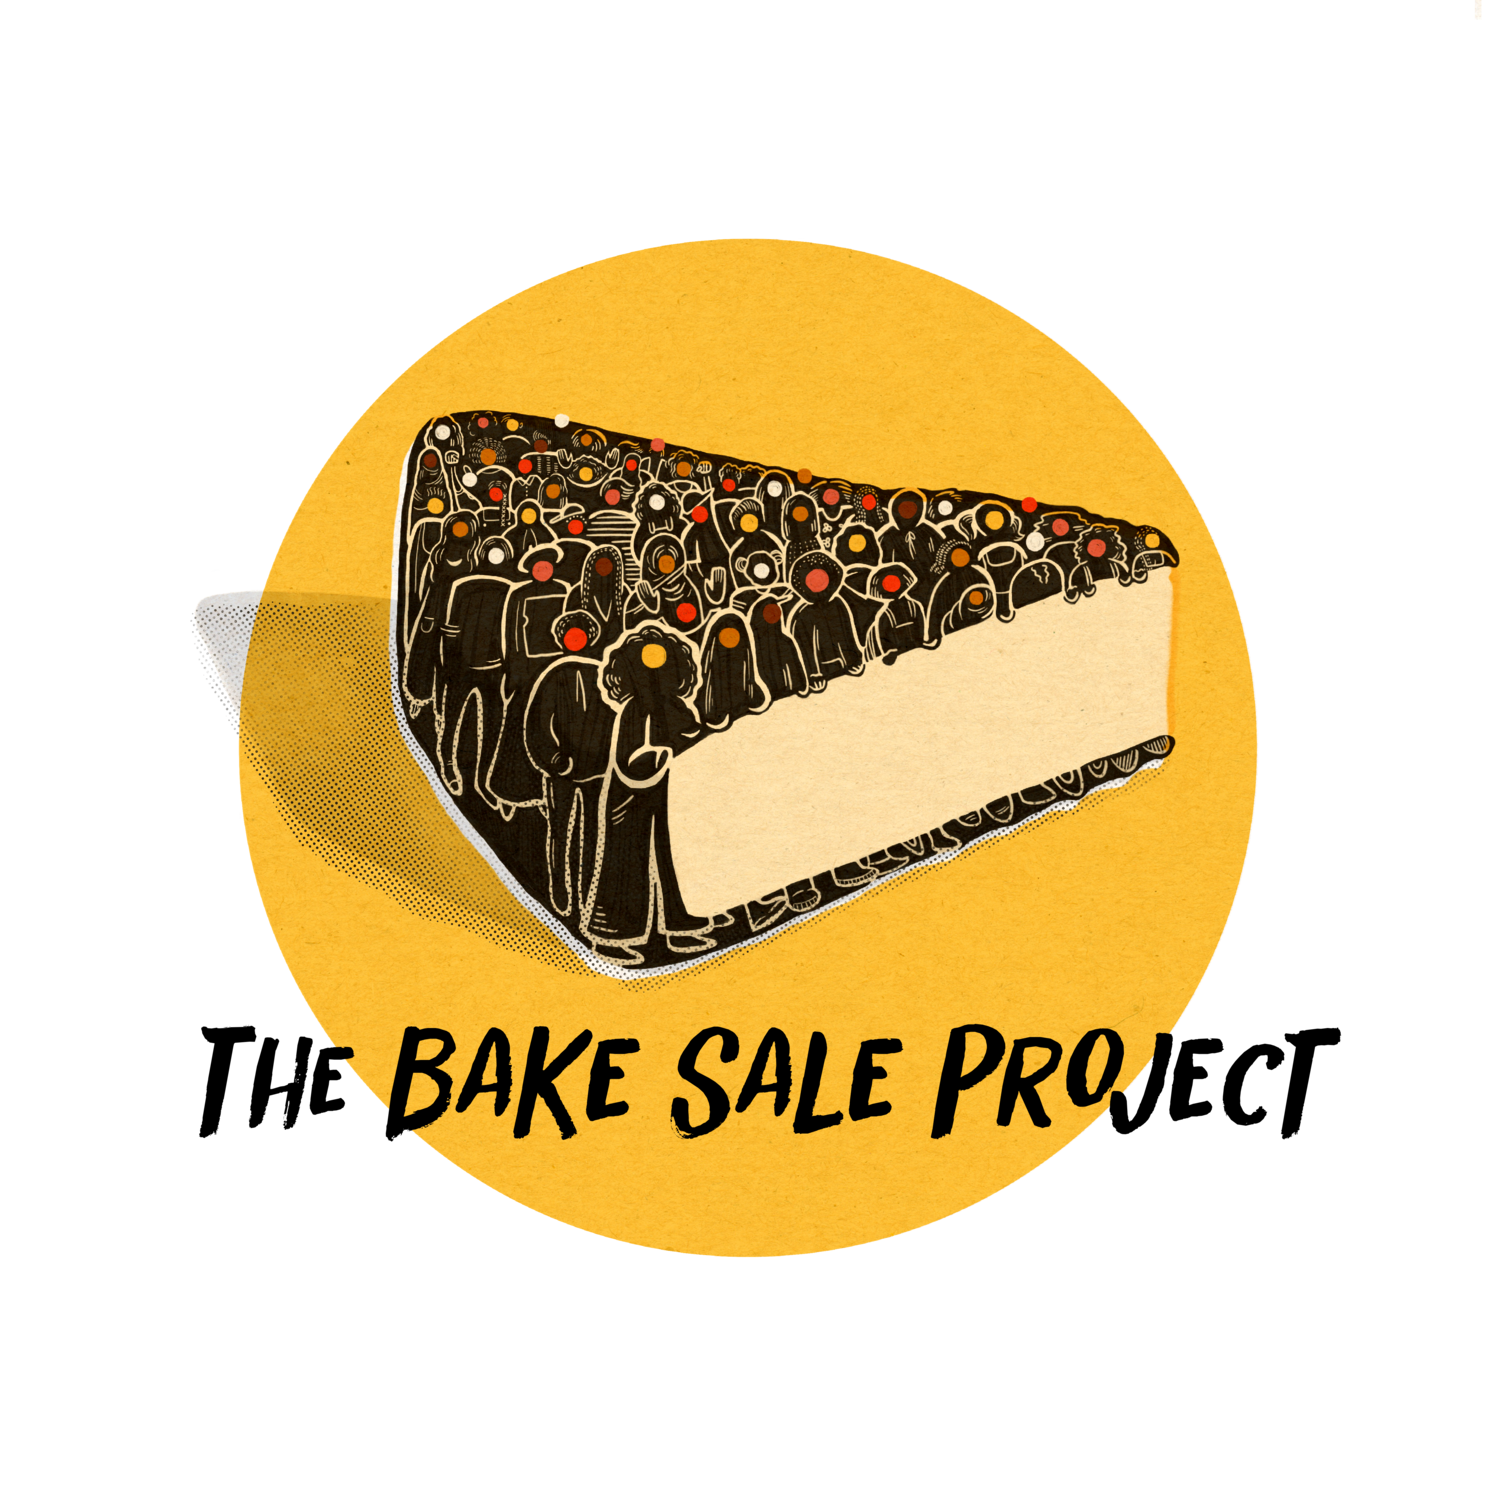 The Bake Sale Project